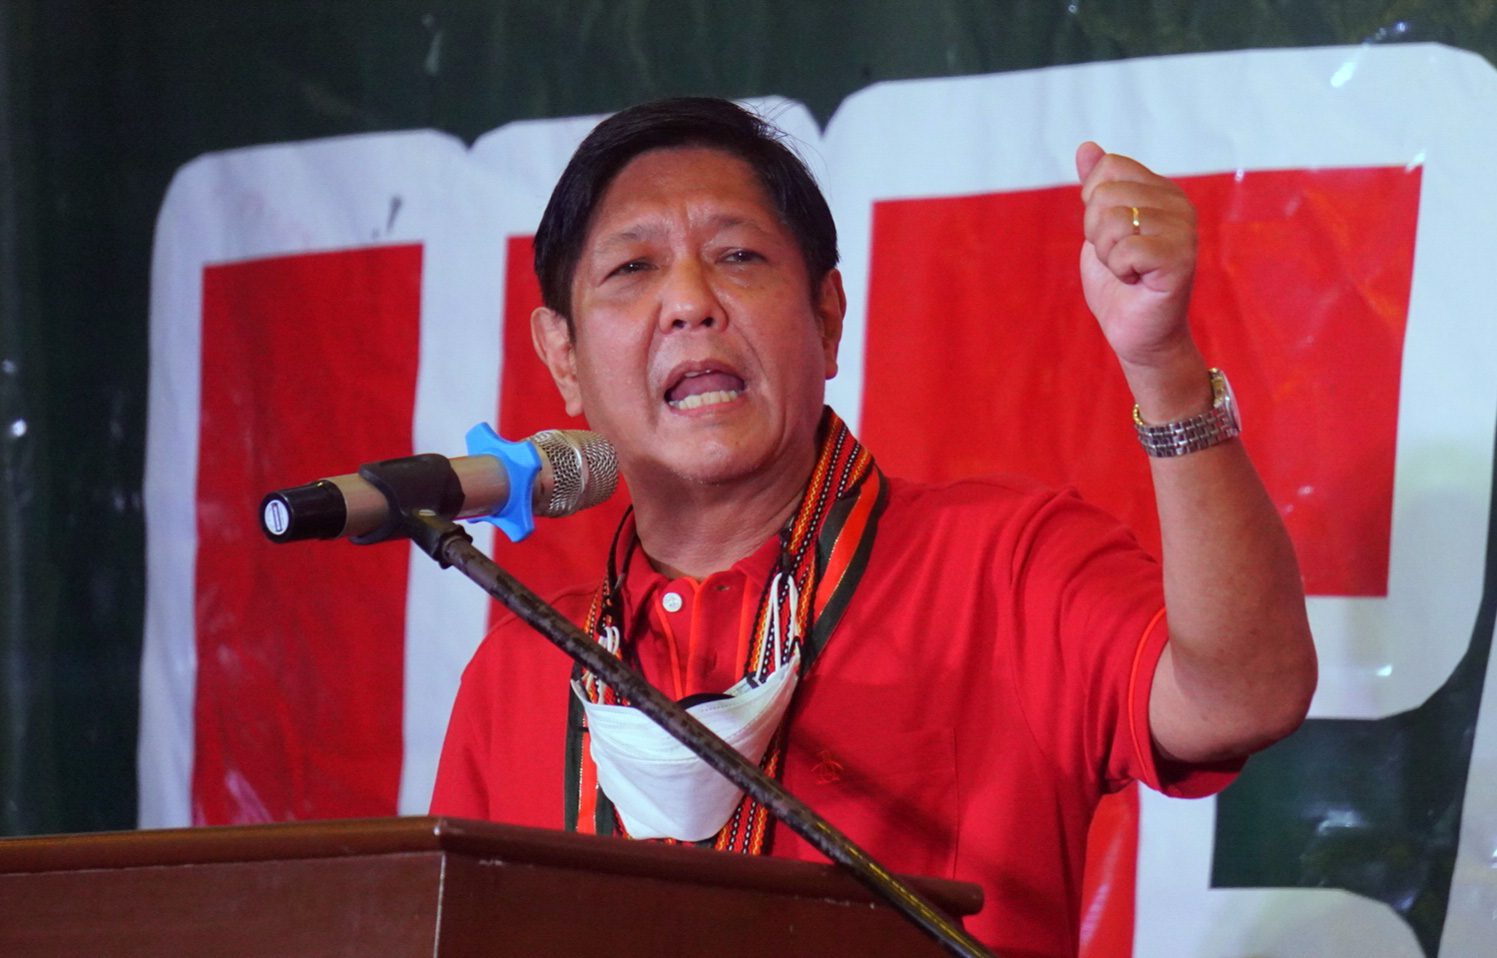 Akbayan wants Comelec to hold Marcos in contempt: ‘He lied through his teeth’